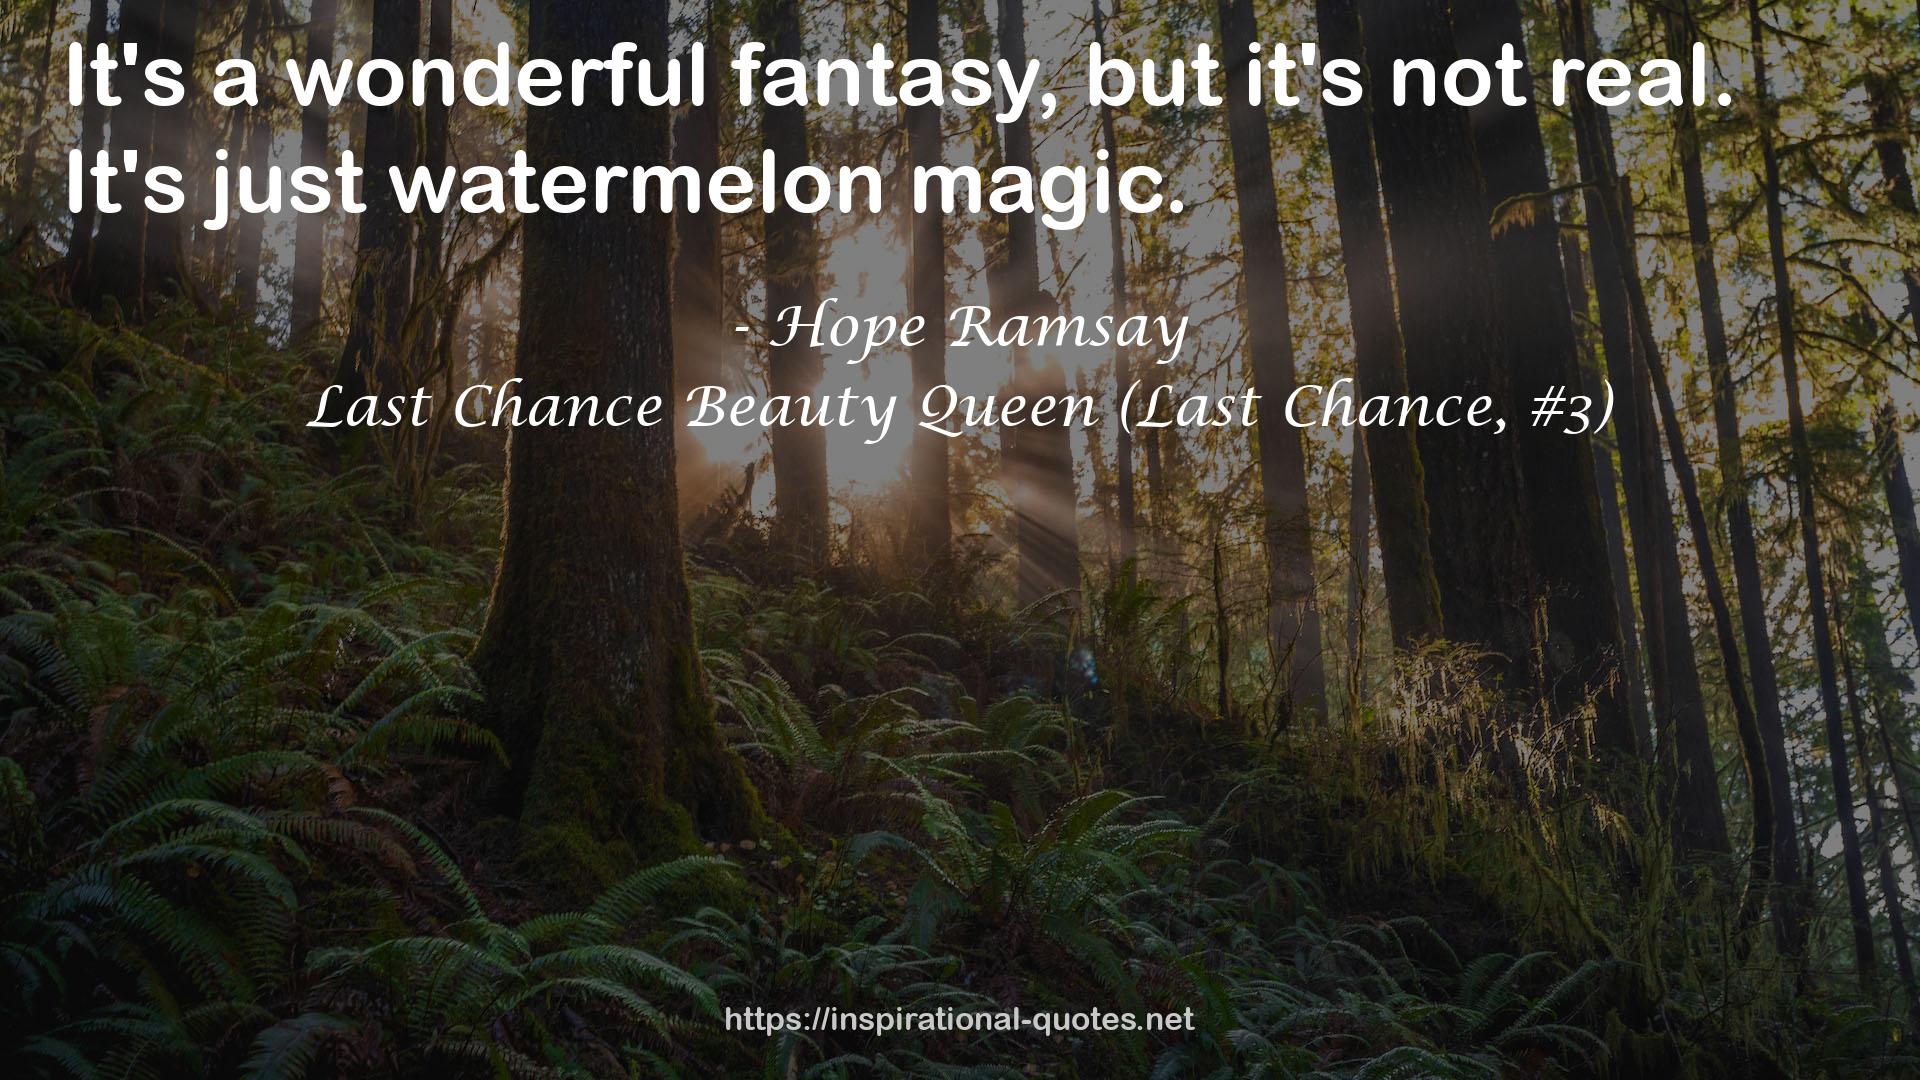 Last Chance Beauty Queen (Last Chance, #3) QUOTES